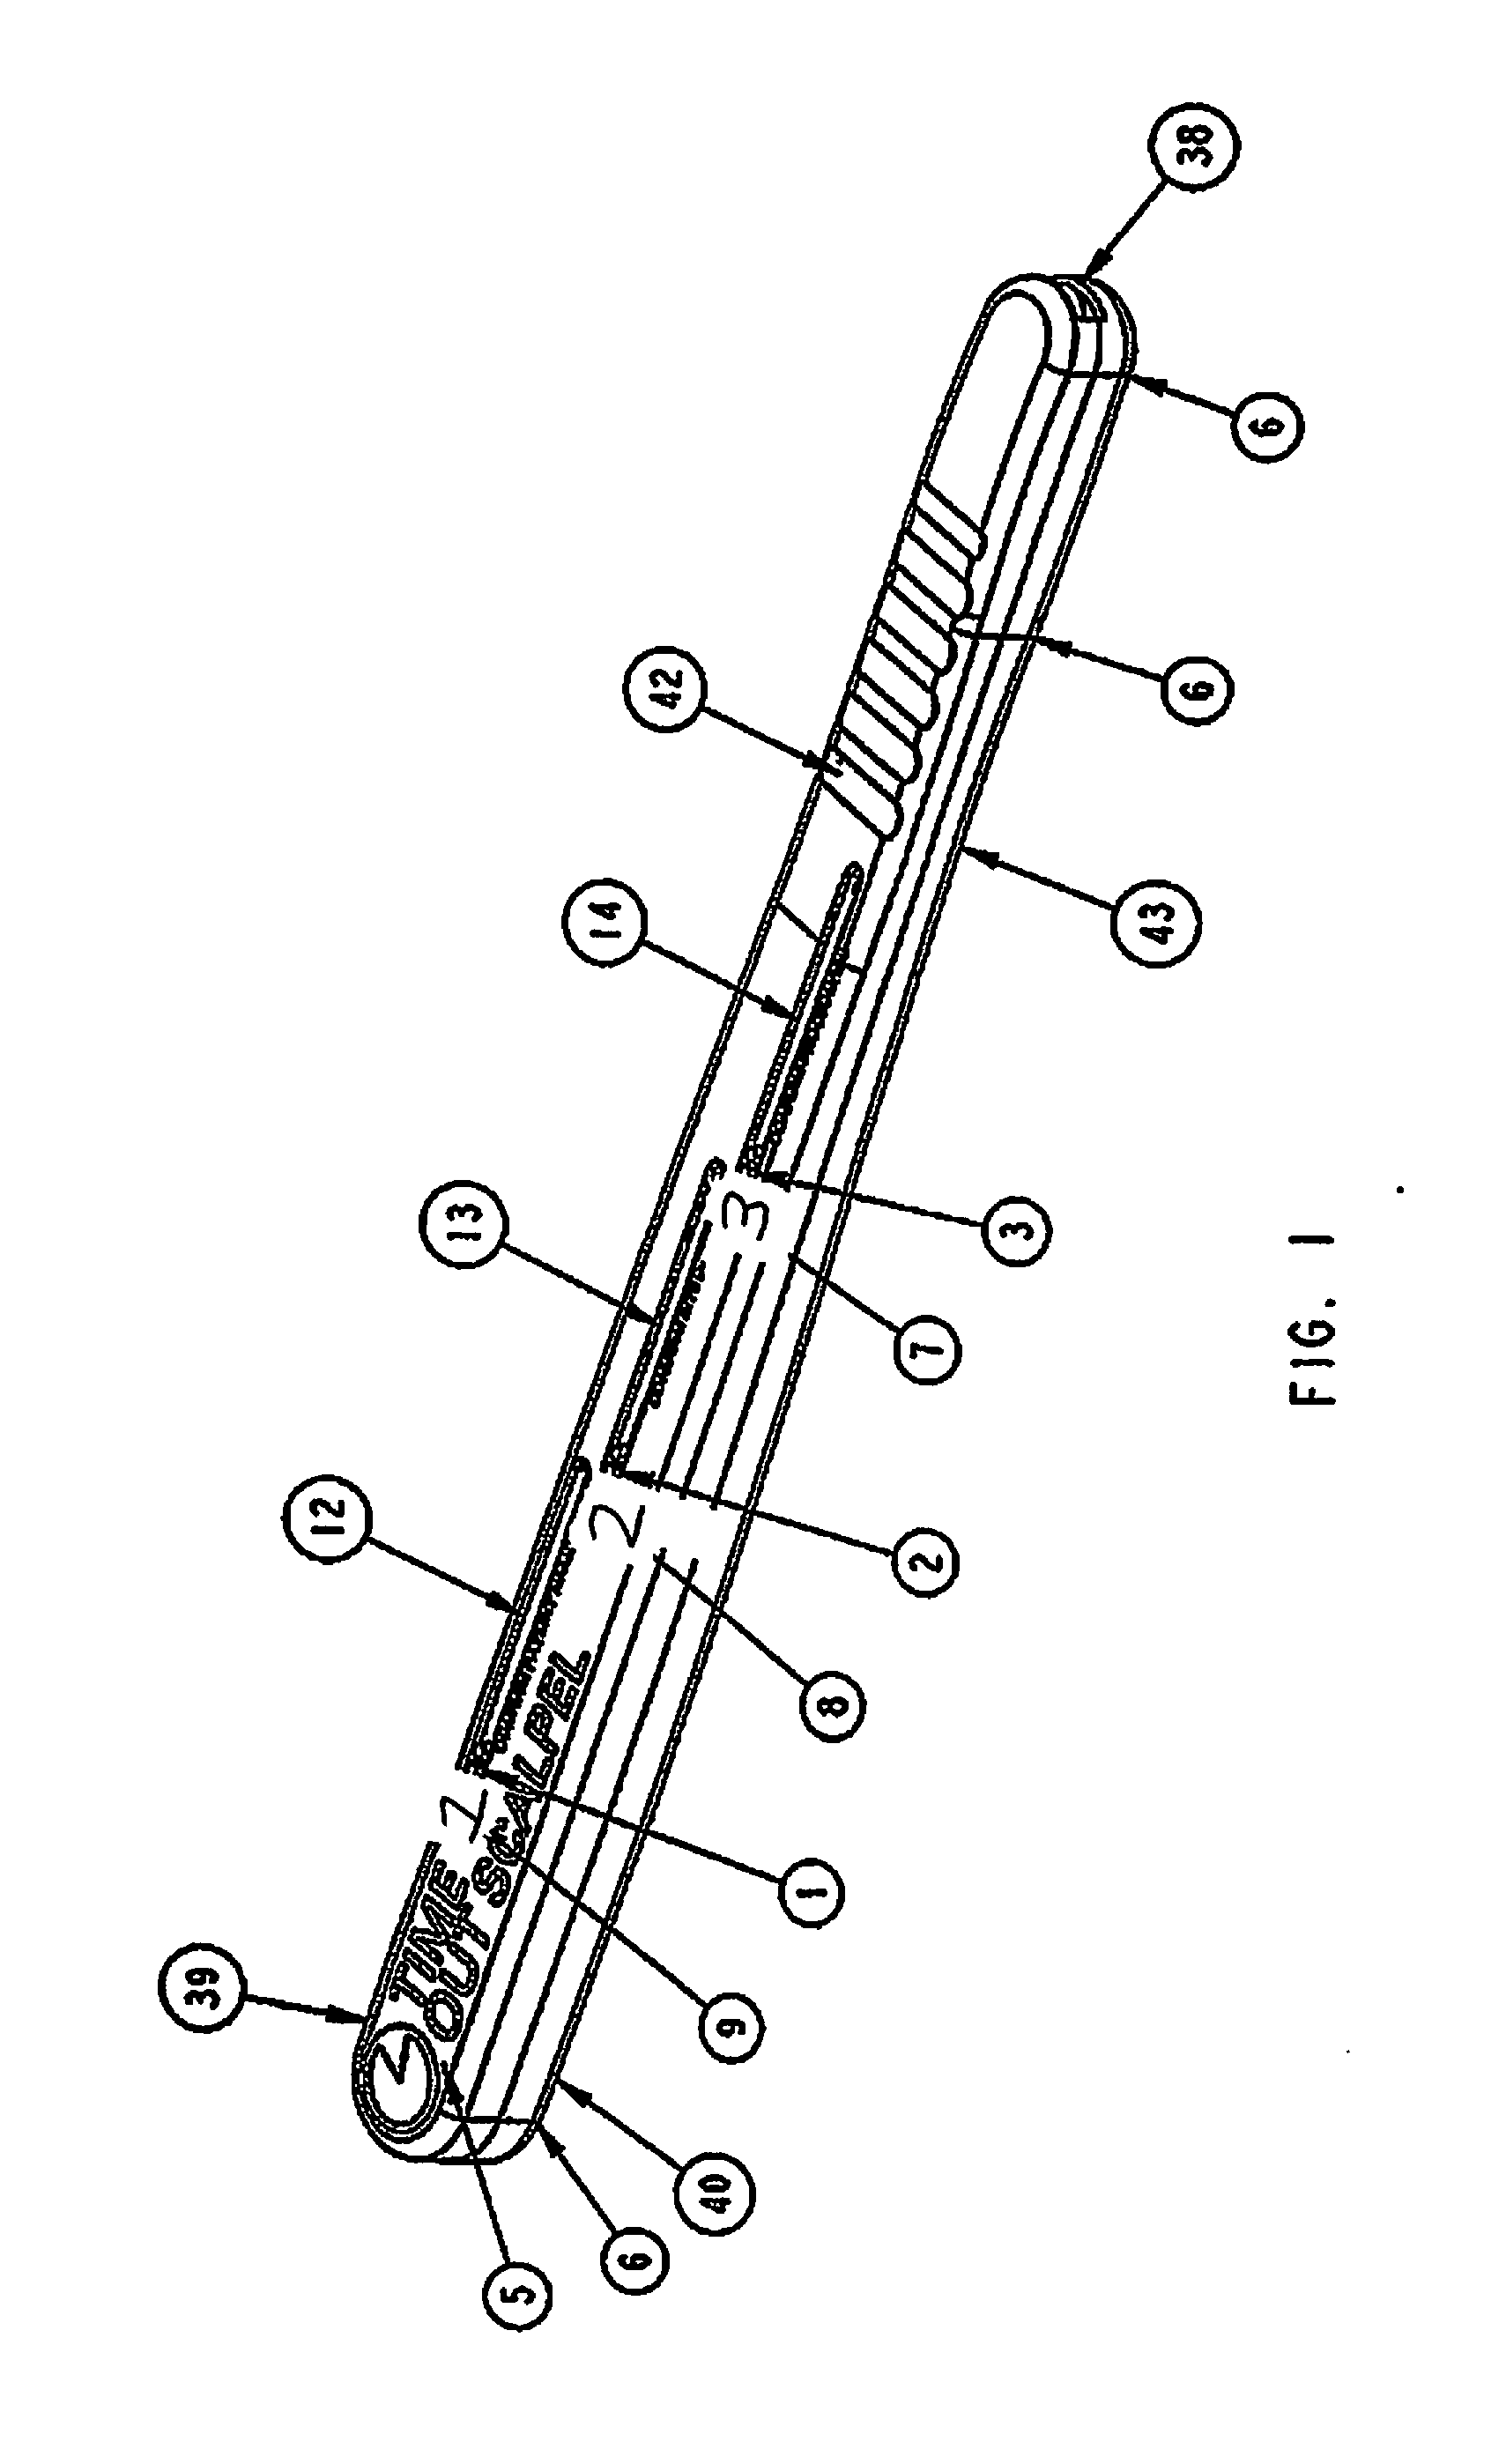 Surgical Scalpel Handle Assembly System And Method For Requiring A Verification Process Performed Prior To And During Surgery Using Actuators to Unlock And Engage Blade Holder in Ready For Cutting Position